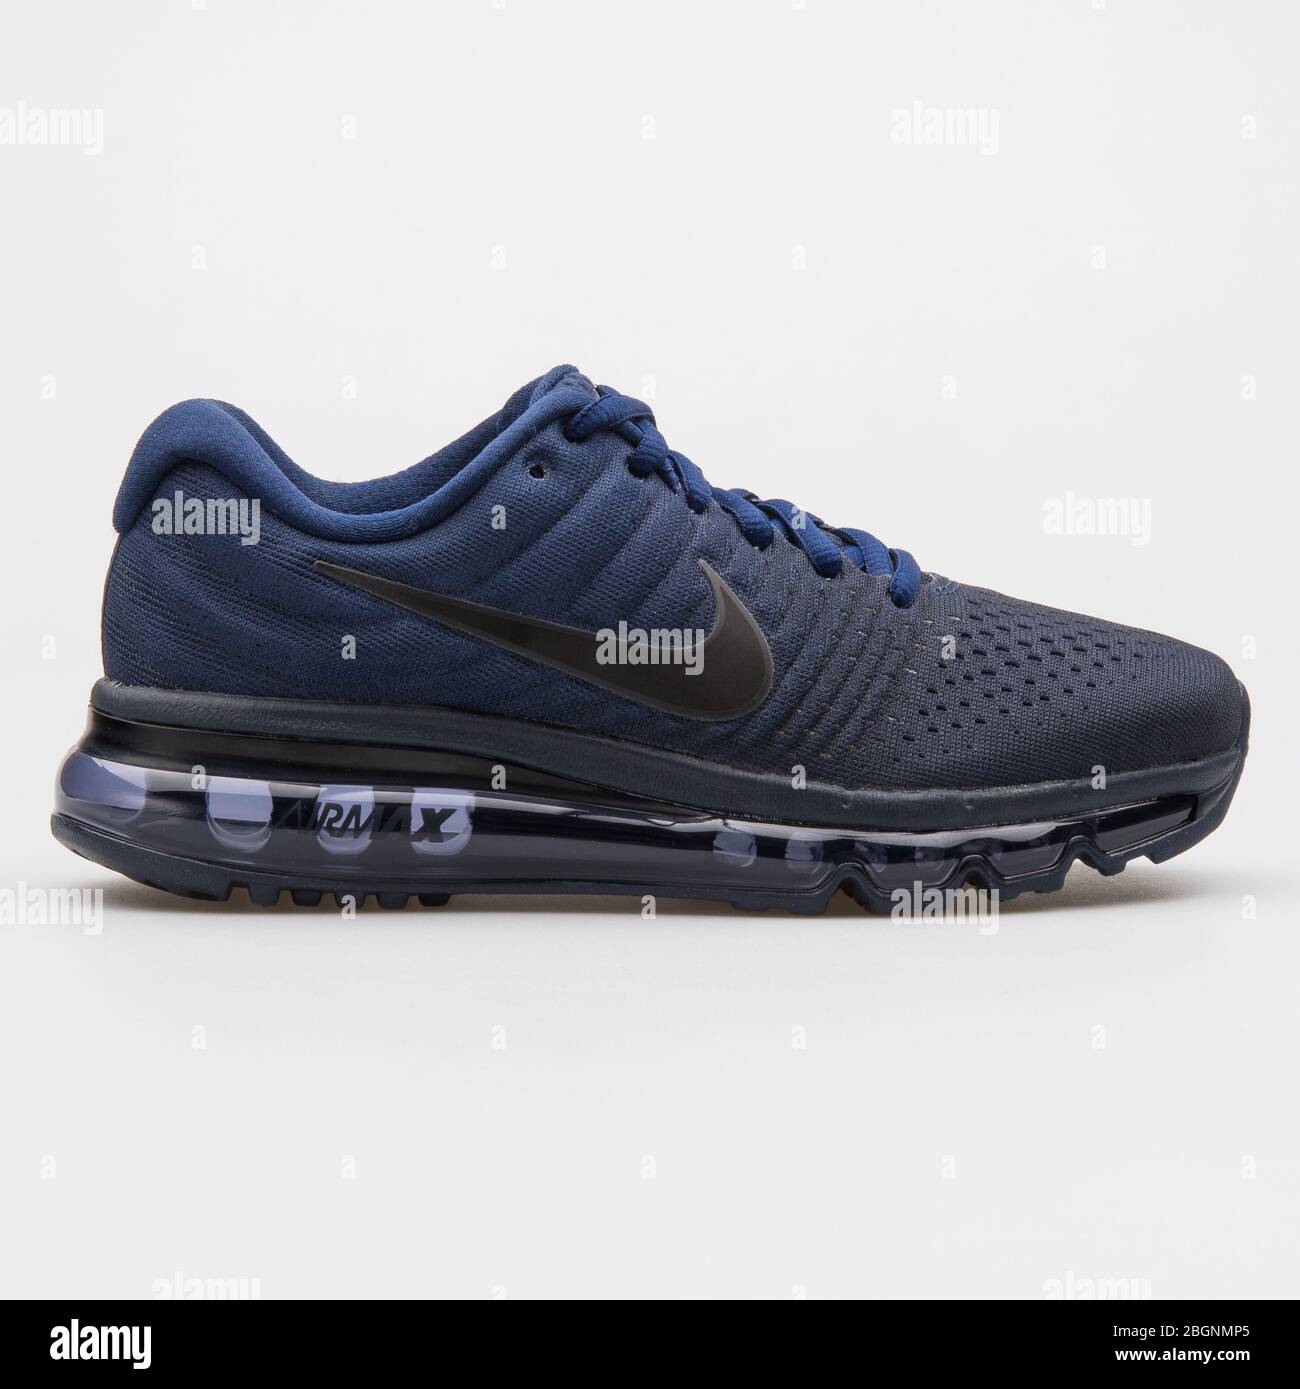 VIENNA, AUSTRIA - AUGUST 14, 2017: Nike Air Max 2017 navy blue and black  sneaker on white background Stock Photo - Alamy